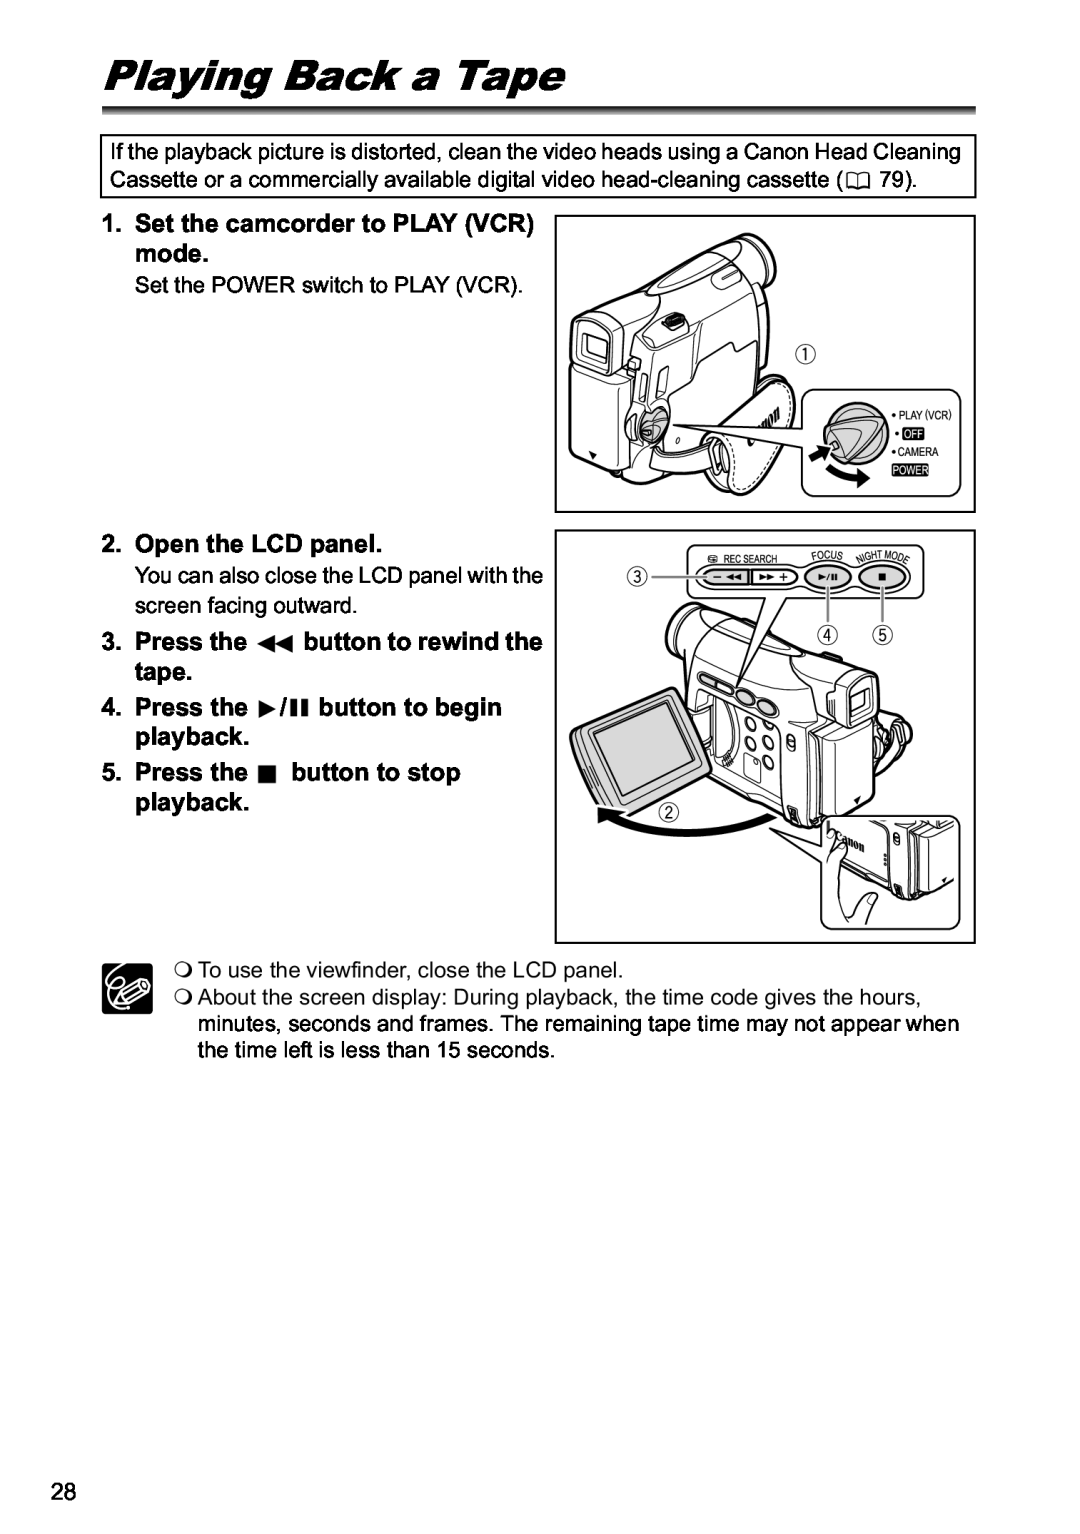 Canon MV800i, MV790 instruction manual Playing Back a Tape, Set the camcorder to PLAY VCR mode, Open the LCD panel 